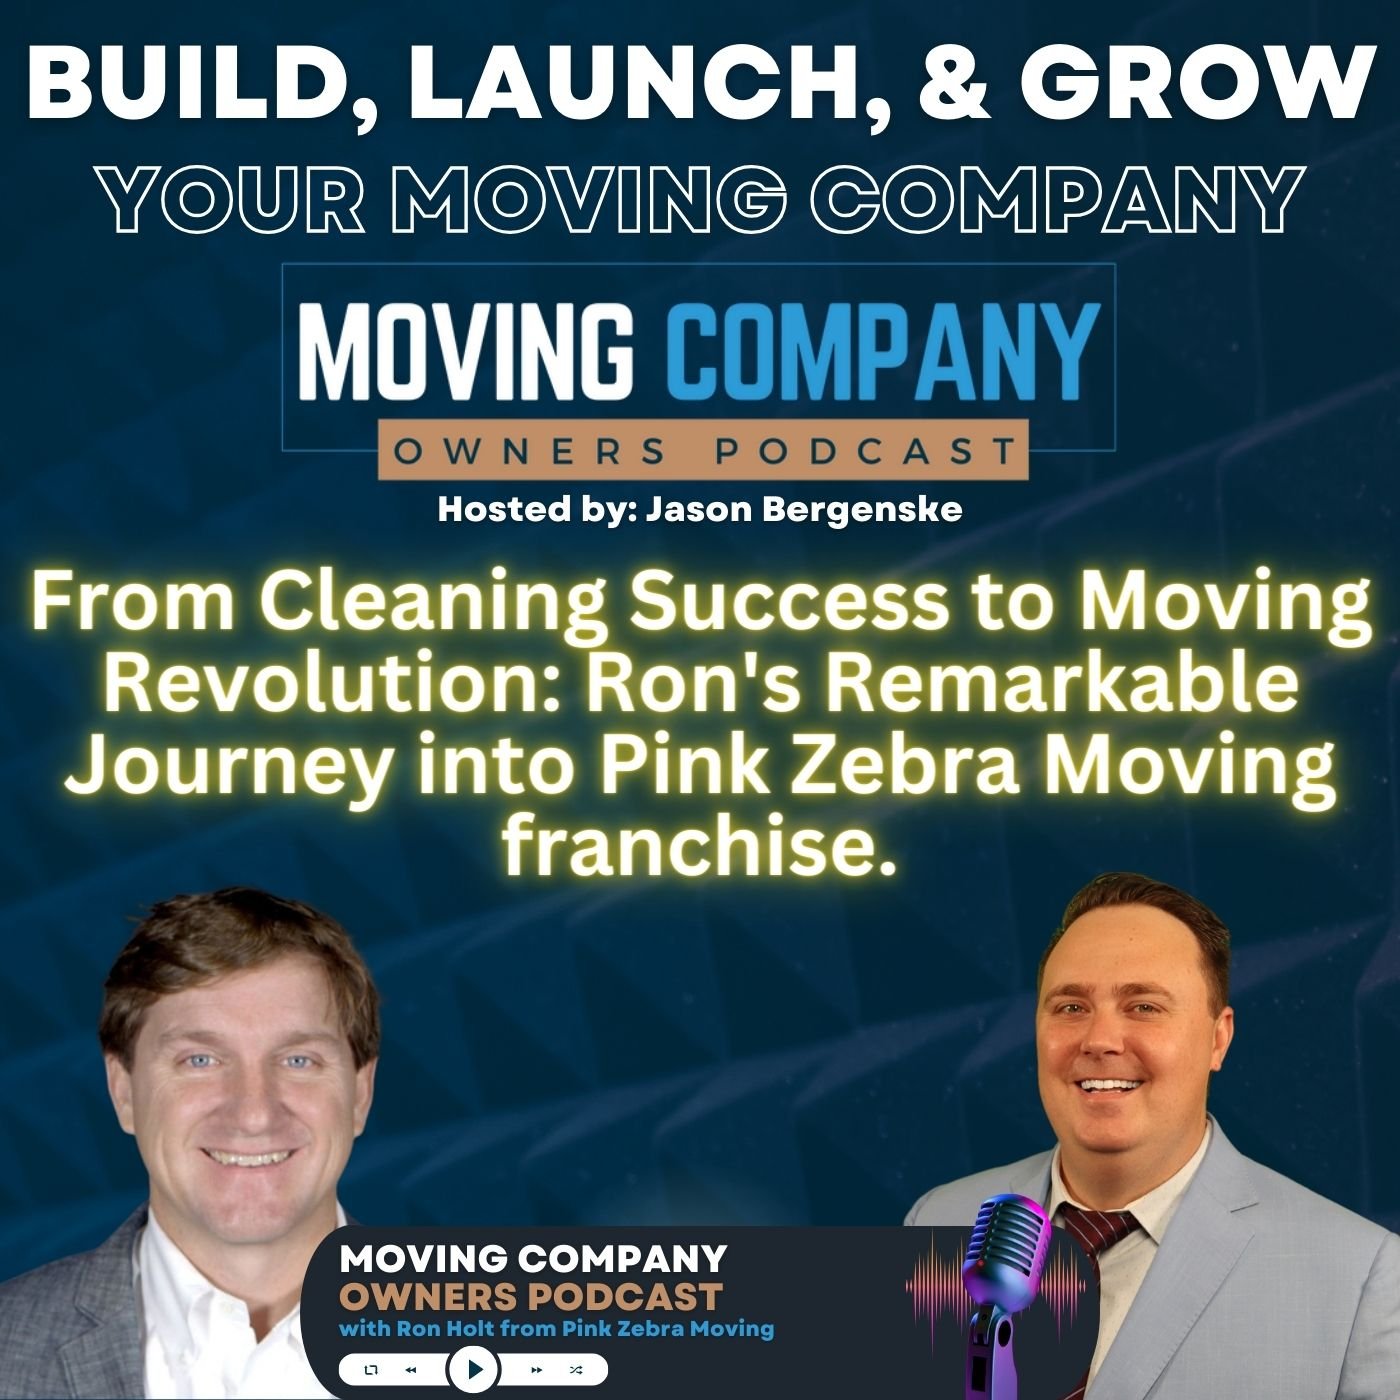 From Cleaning Success to Moving Revolution: Ron's Remarkable Journey into Pink Zebra Moving Franchise.